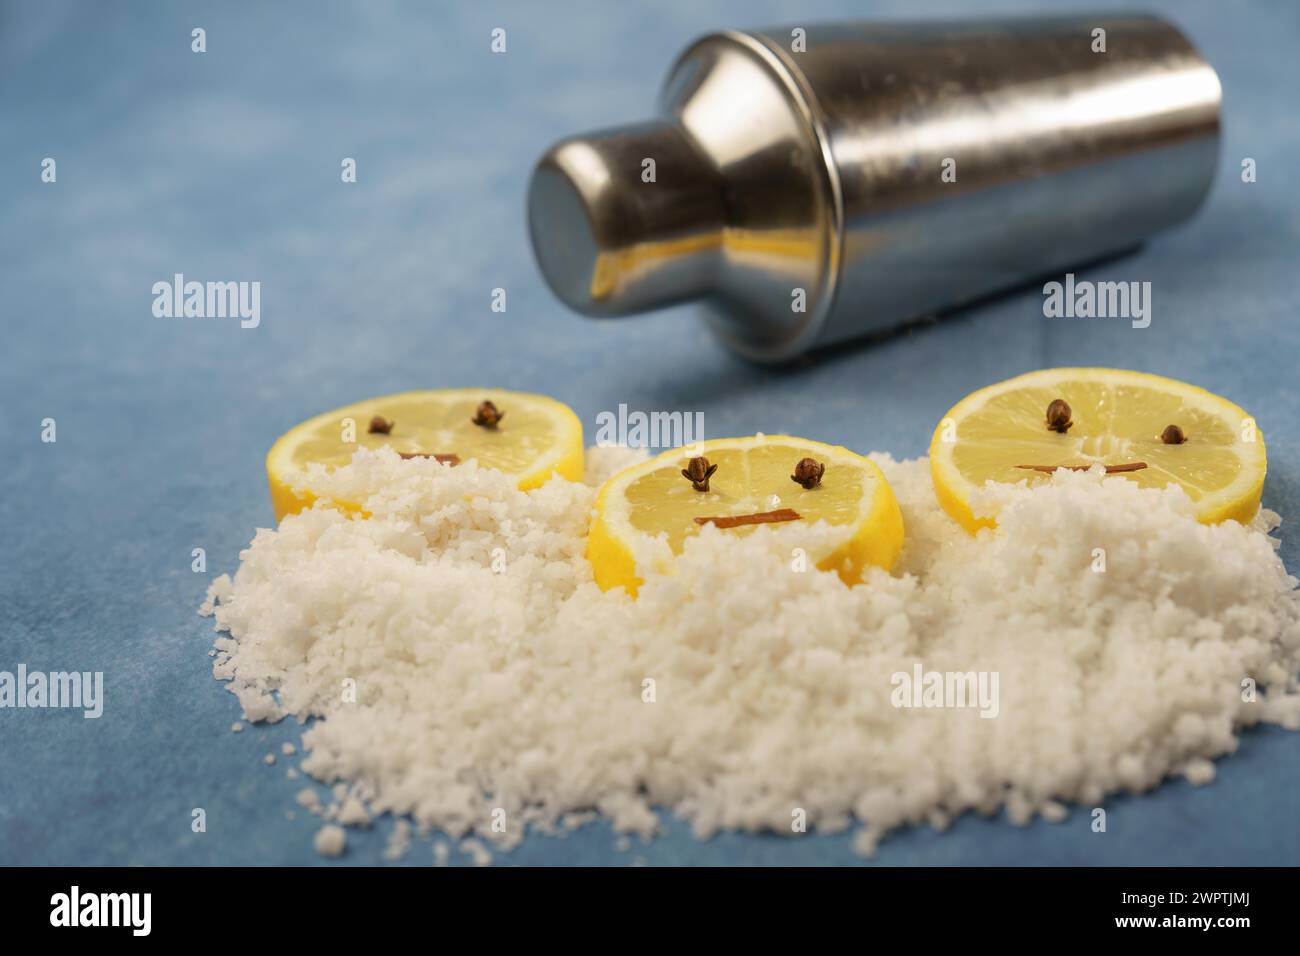 Lemon slices with cloves and cinnamon forming a smiley face on a pile of salt next to a shaker with blue background with copy space Stock Photo